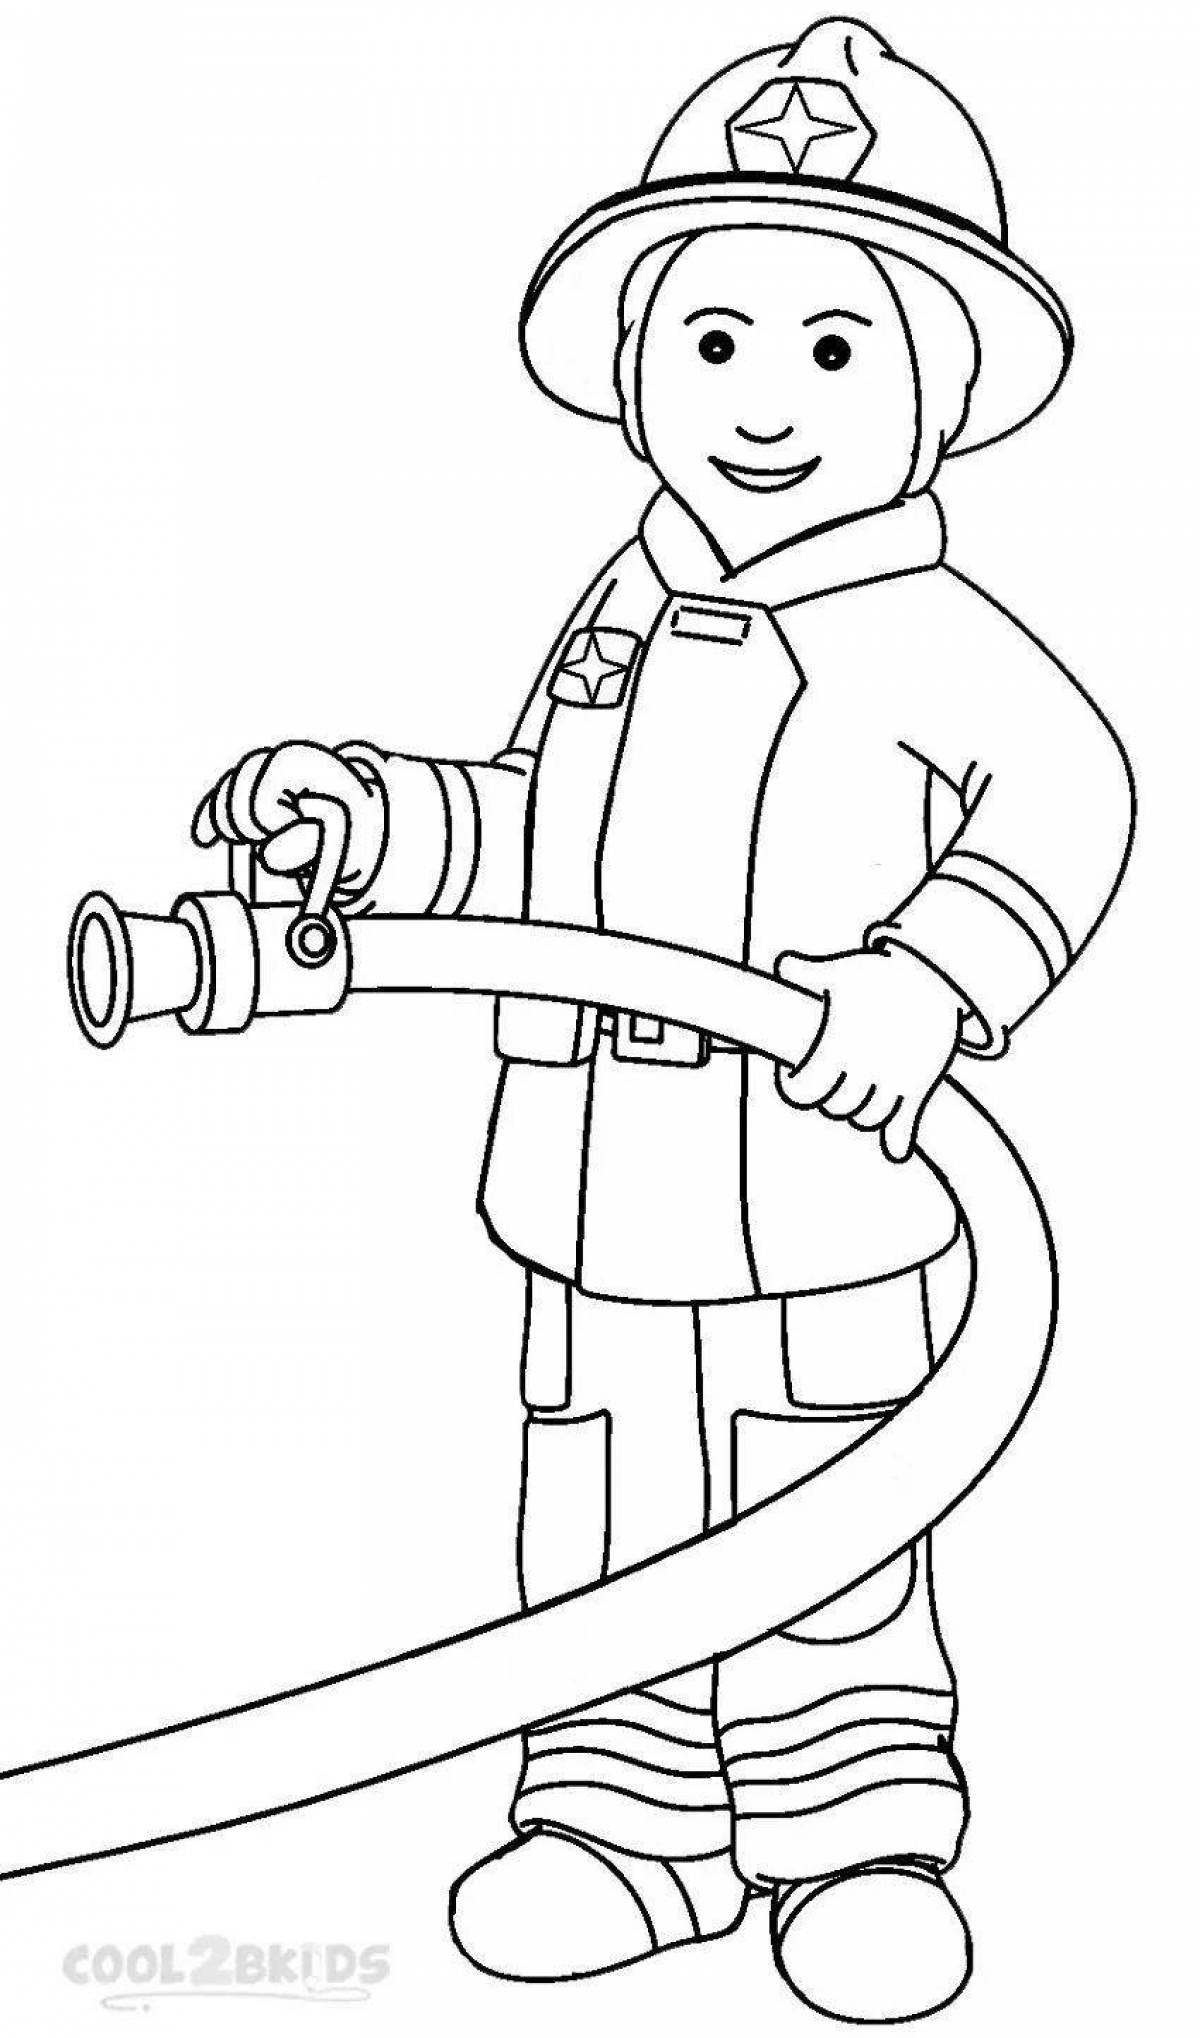 Outstanding fireman drawing for kids